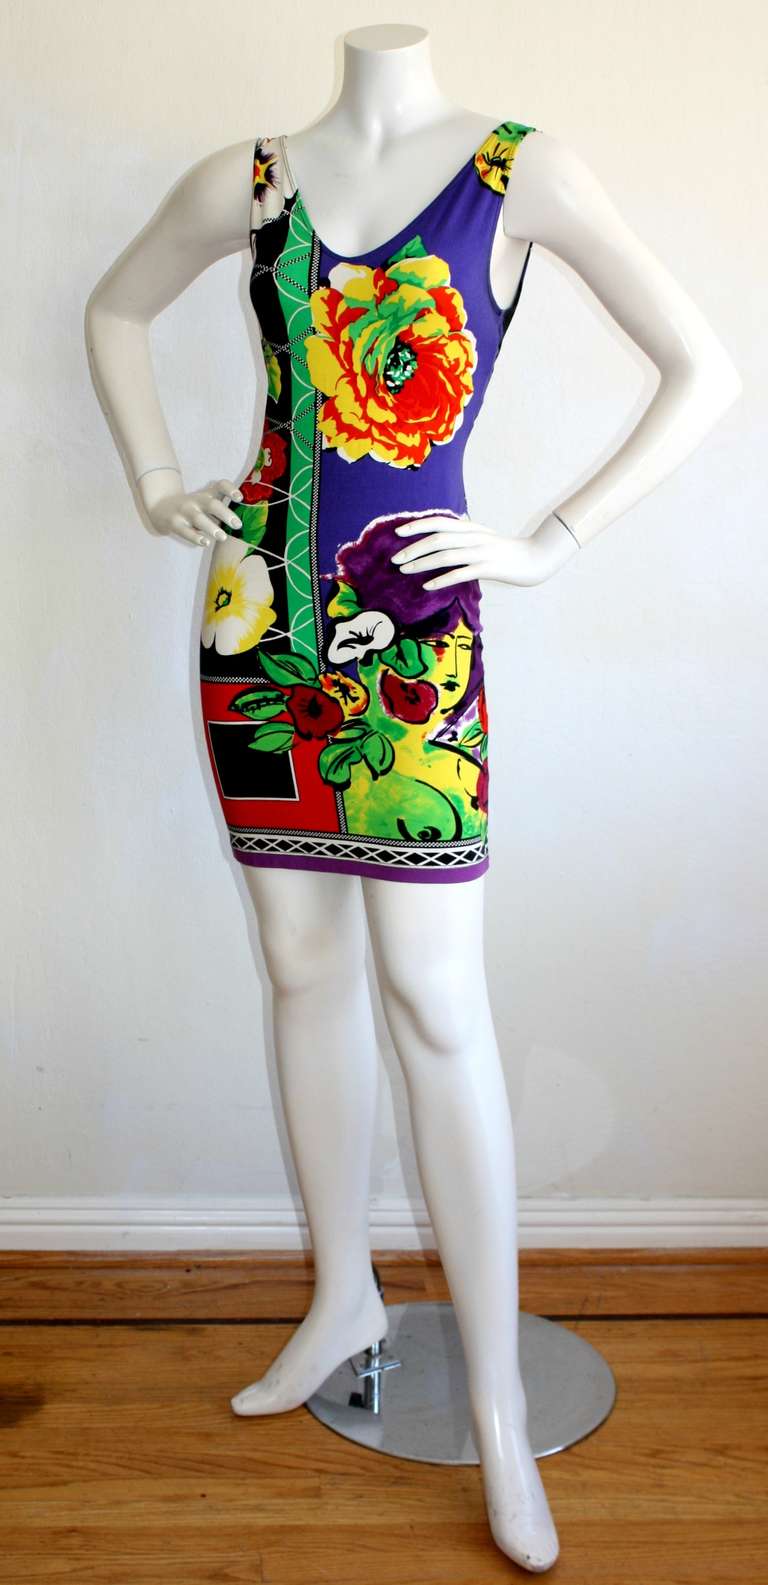 Sexy vintage Gianni Versace stretch mini dress for the 1990s prior to his tragic death. Features signature Versace prints throughout. Gorgeous vibrant colors, with a flattering, and, oh so sexy fit. Beautiful open back. Approximately Size Small -